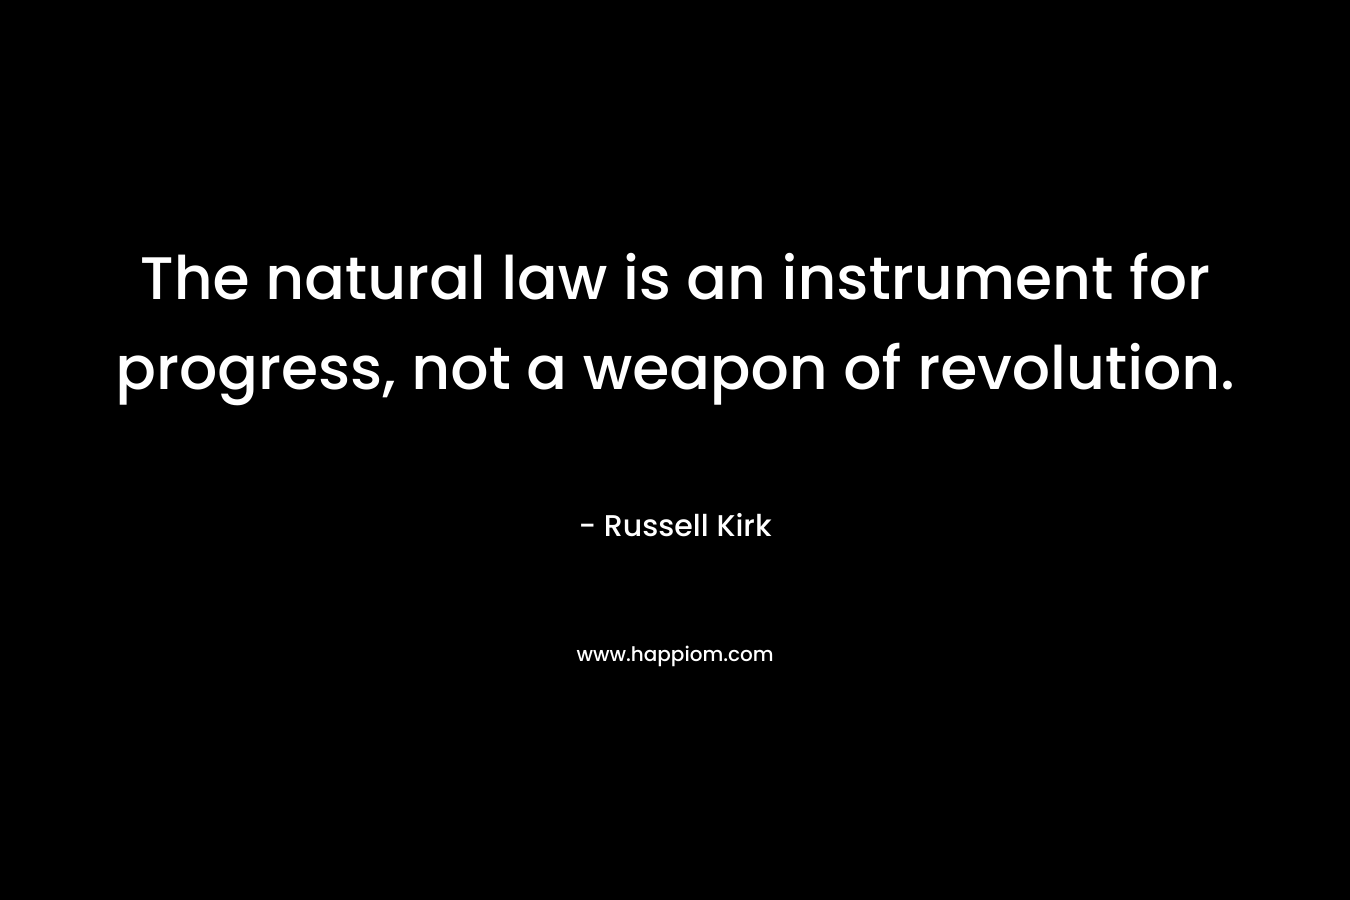 The natural law is an instrument for progress, not a weapon of revolution. – Russell Kirk